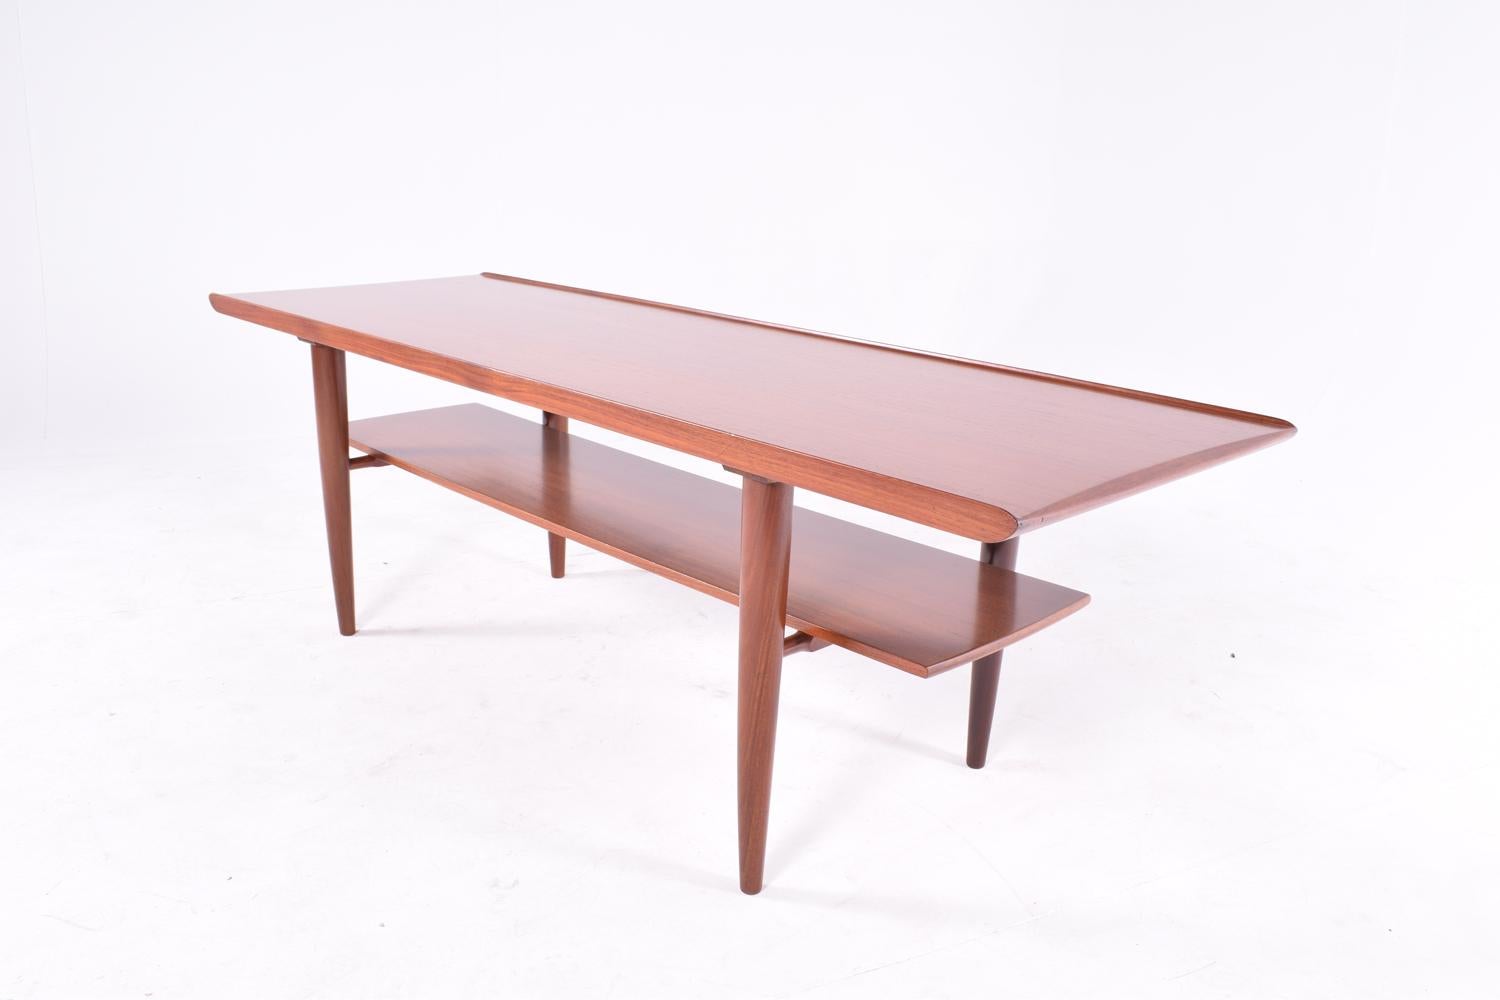 This midcentury coffee table is a beautiful addition to any modern living room. This piece from the 1960s combines delicate construction details with a straight and sleek design. The two levels allow for different usage, as you can combine different